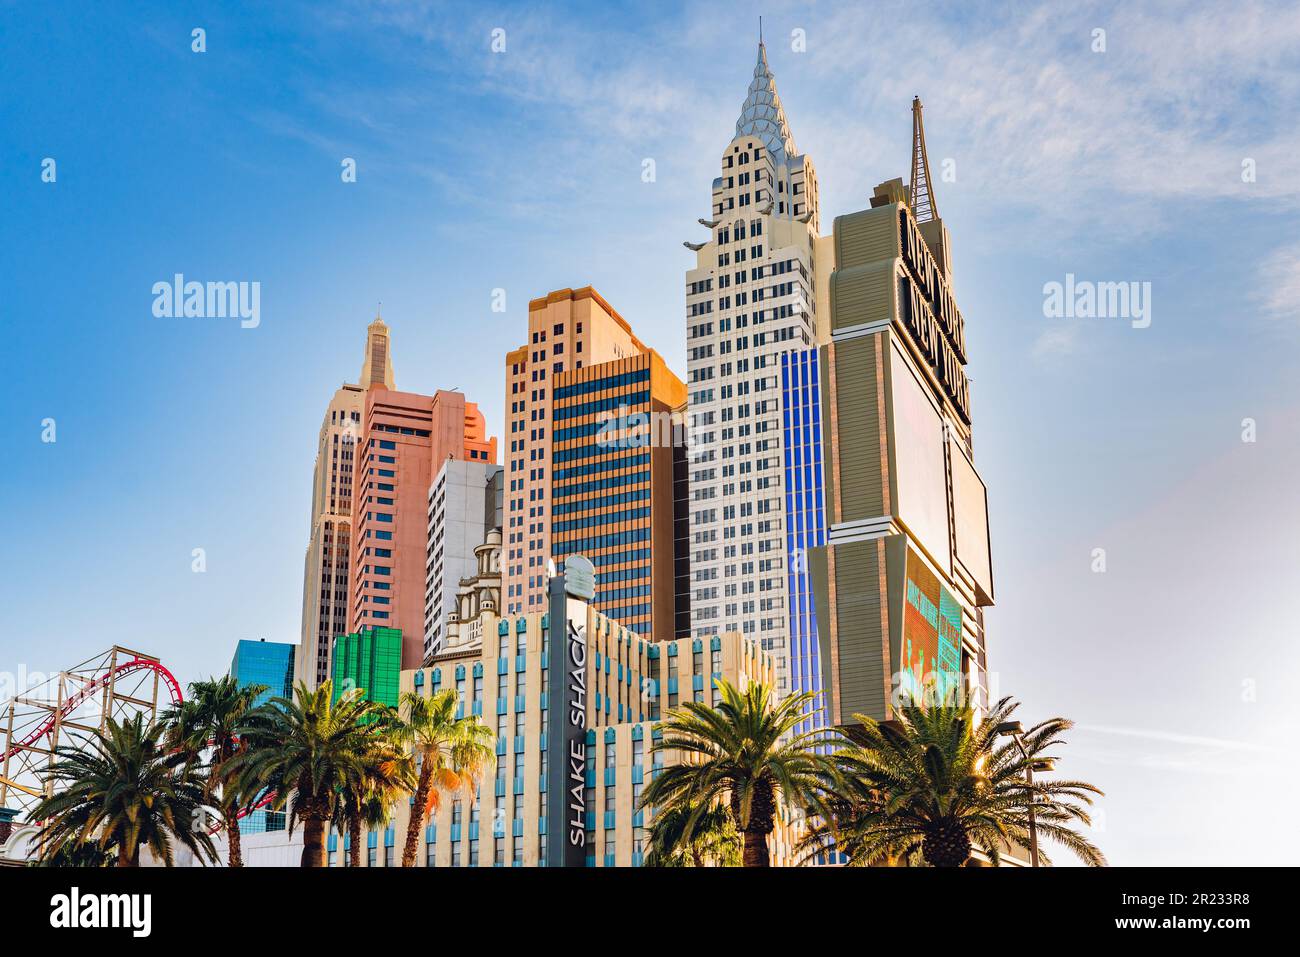 Las Vegas, Nevada, USA - May 4, 2022.  New York-New York Hotel and Casino in the center of Las Vegas Strip. Architecture, people, street view Stock Photo